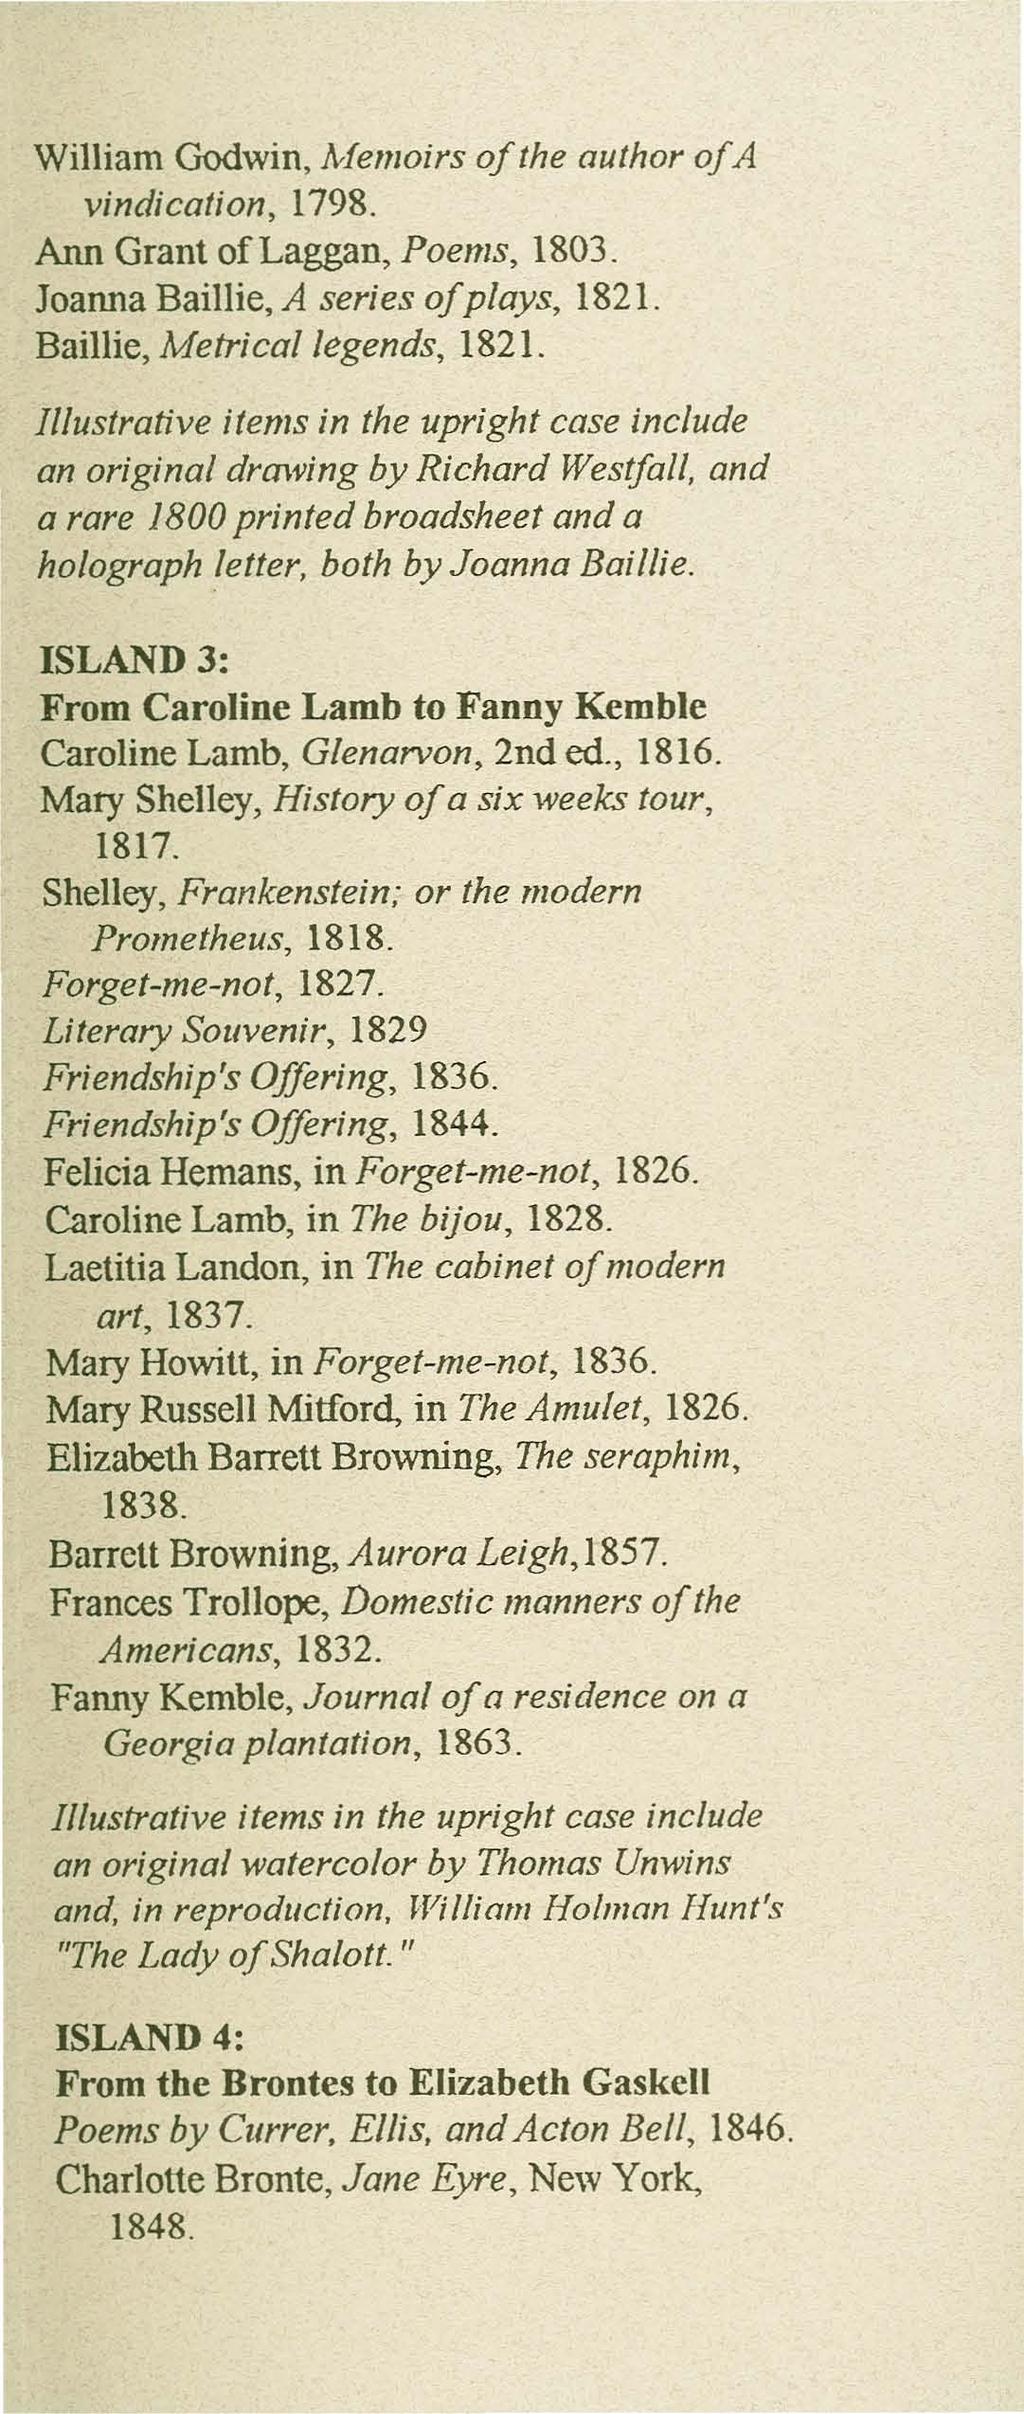 William Godwin, Memoirs of the author of A vindication, 1798. Ann Grant oflaggan, Poems, 1803. Joanna Baillie, A series of plays, 182l. Baillie, Metrical legends, 182l.